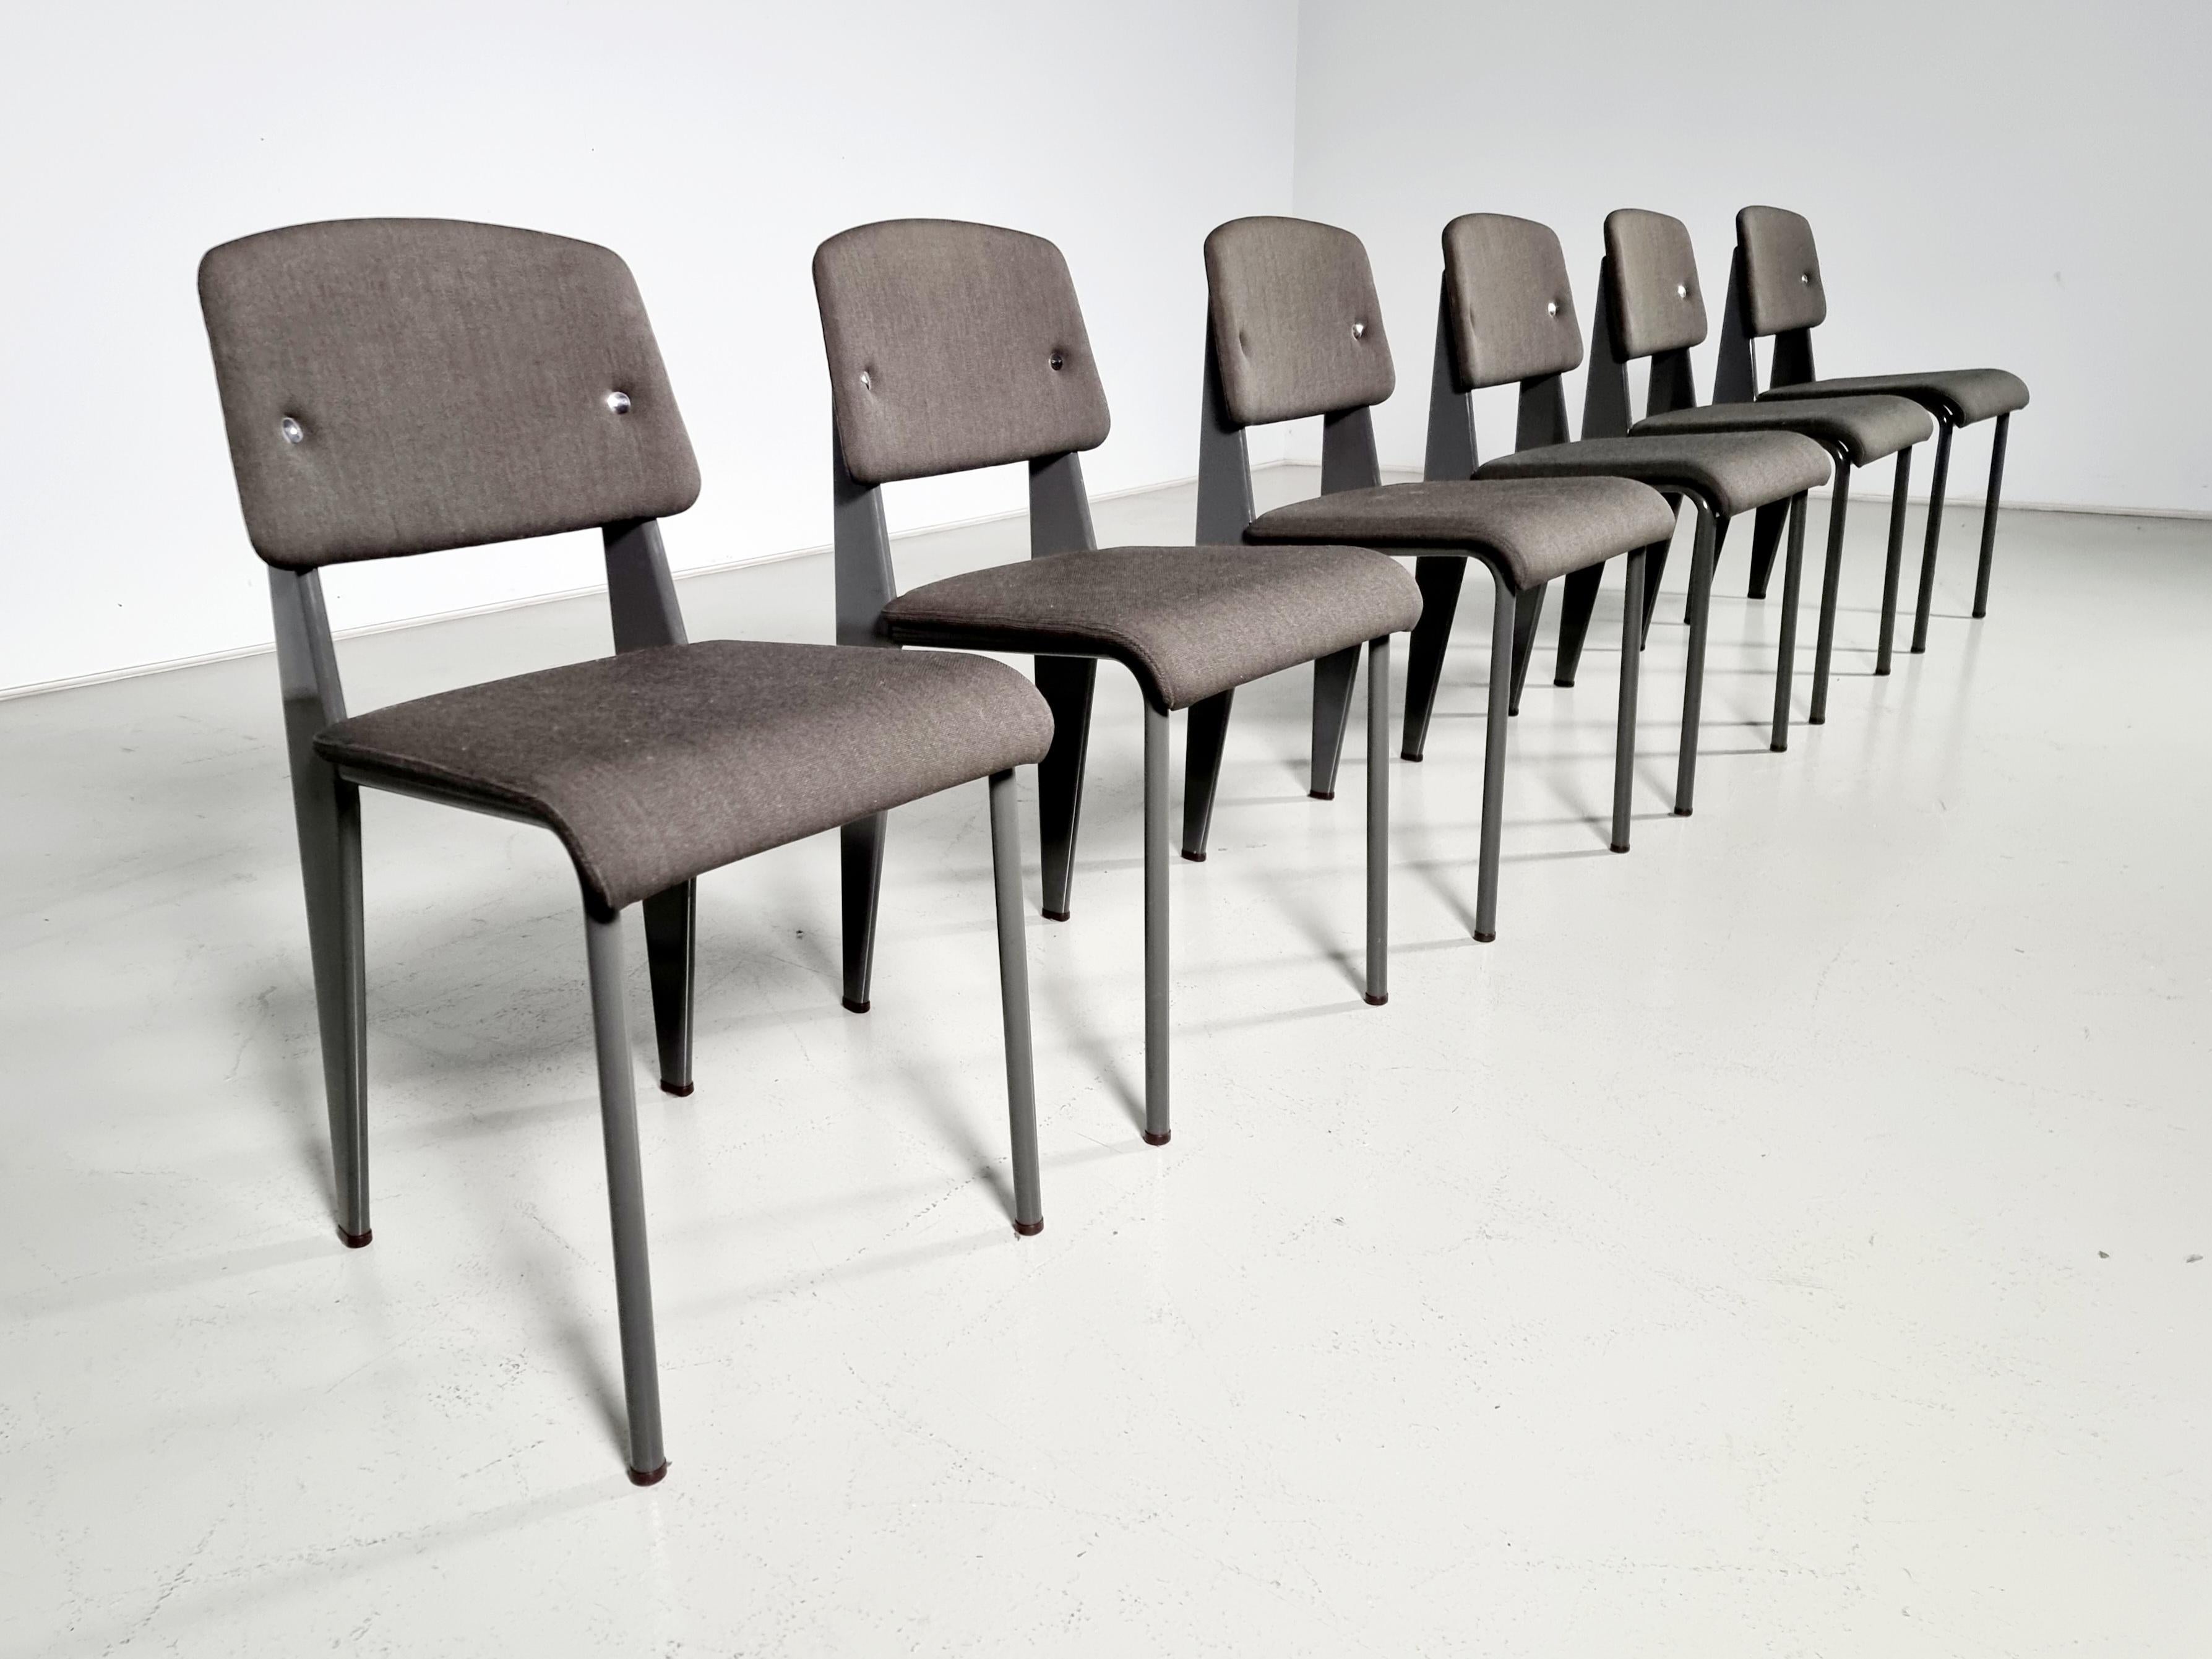 Jean Prouve by G-Star Raw for Vitra S.A.M. Tropique Table with matching chairs For Sale 10